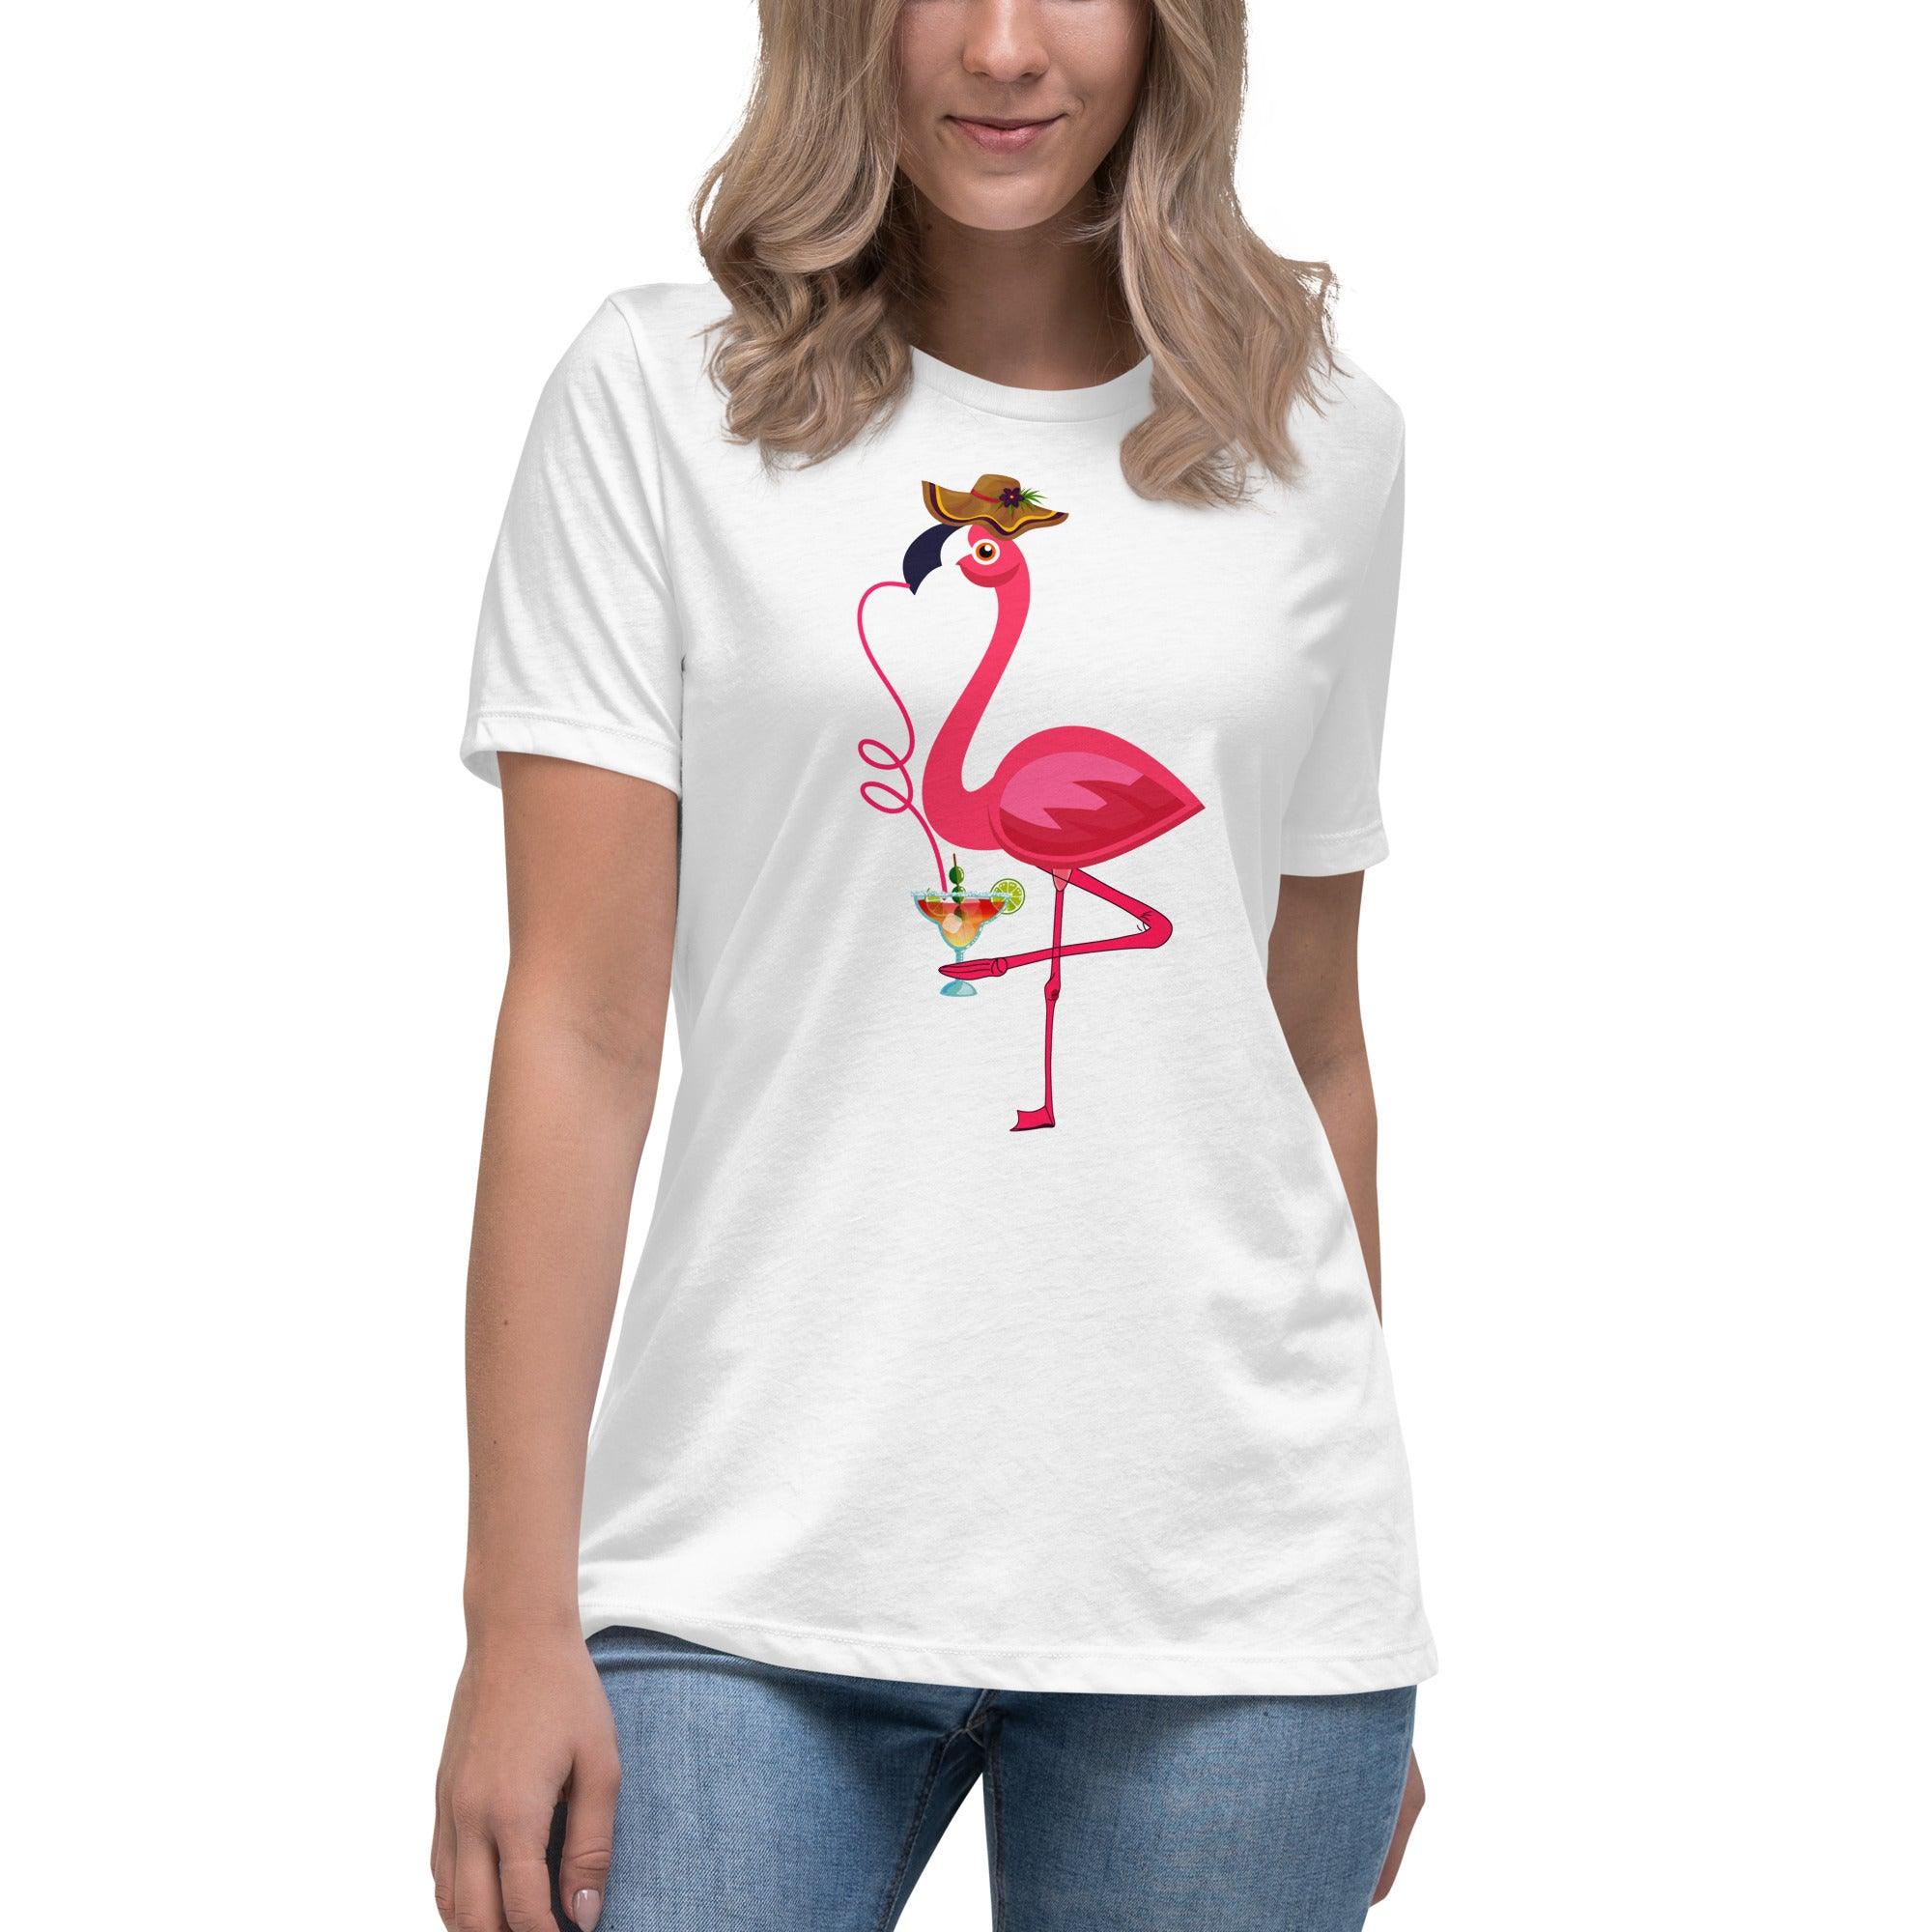 Women's Relaxed T-Shirt-Pool Party - Elementologie